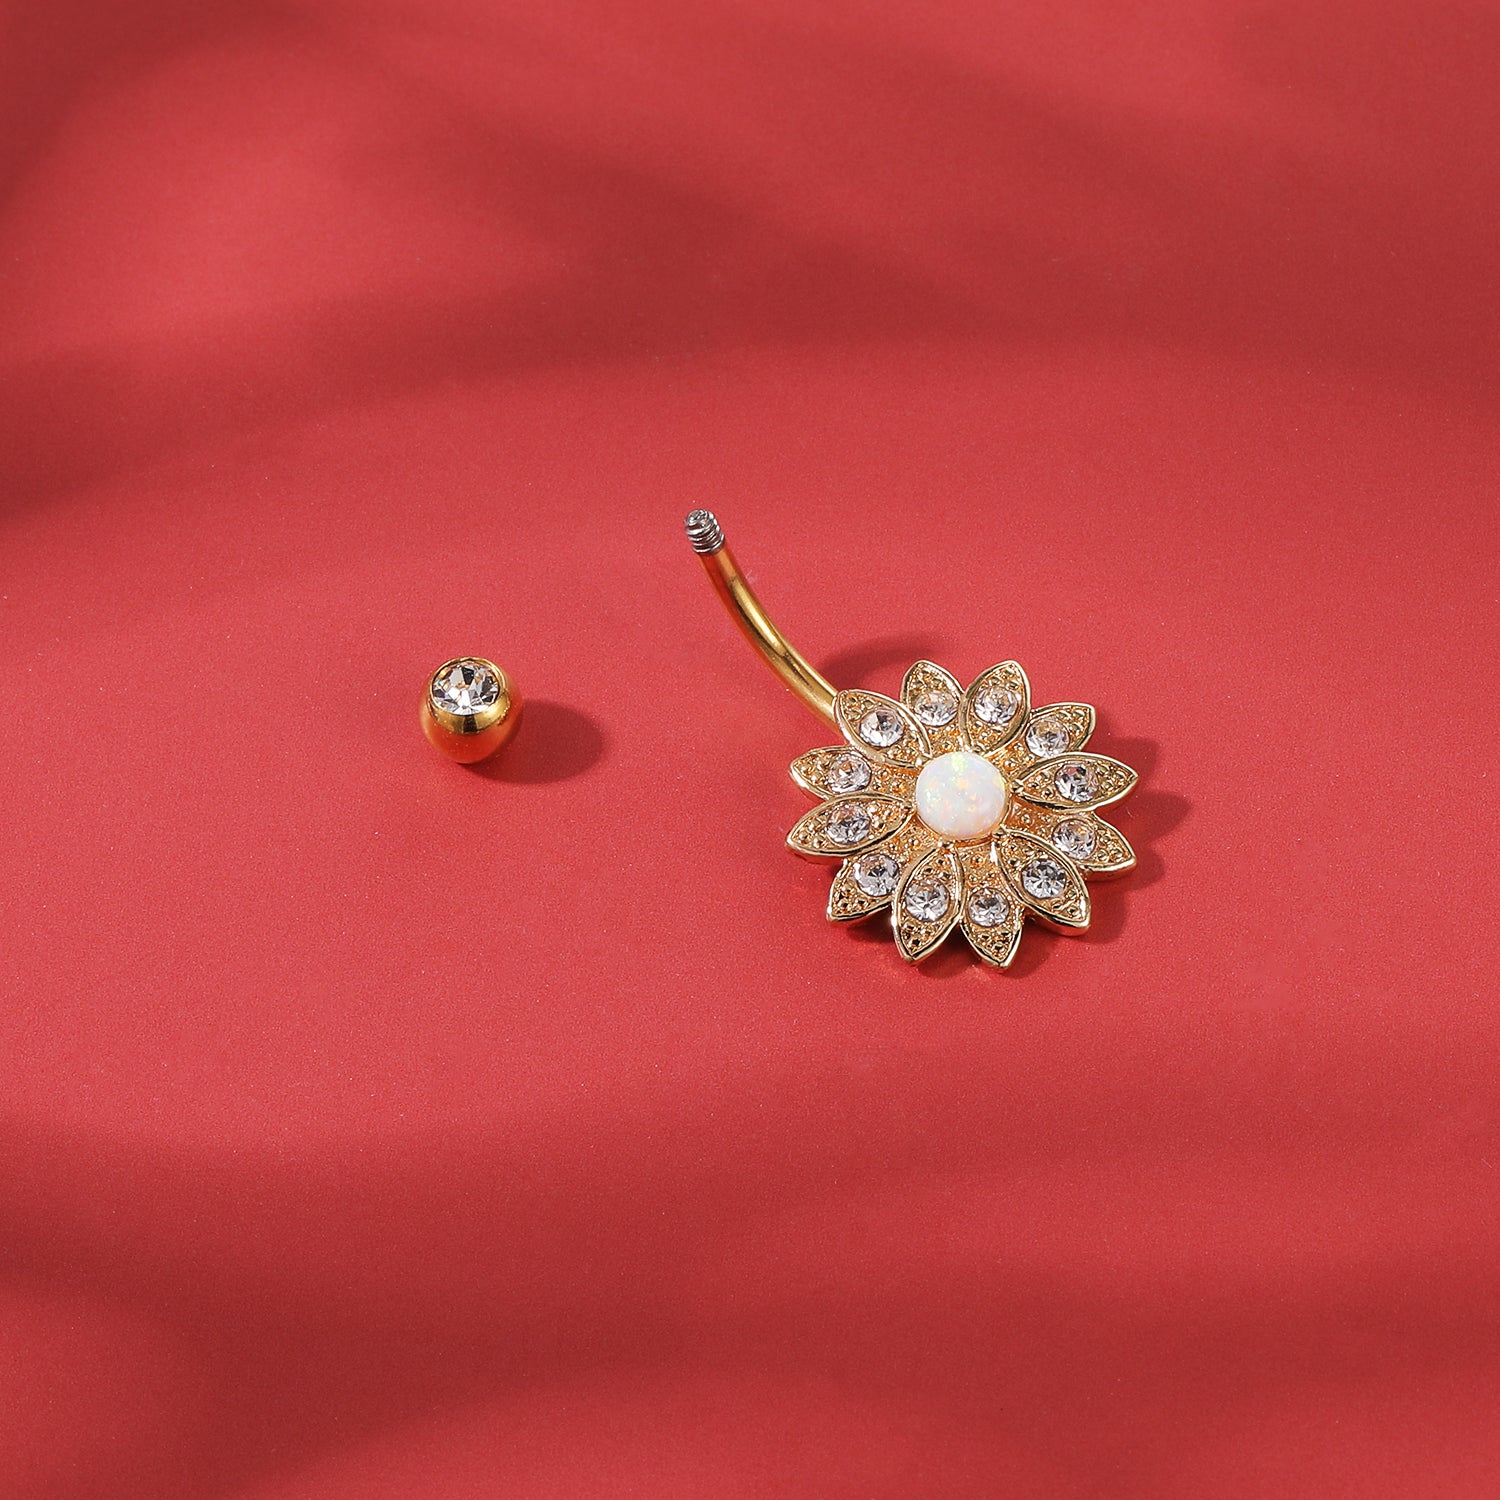 14g-flower-belly-button-rings-gold-zirconia-belly-navel-piercing-jewelry